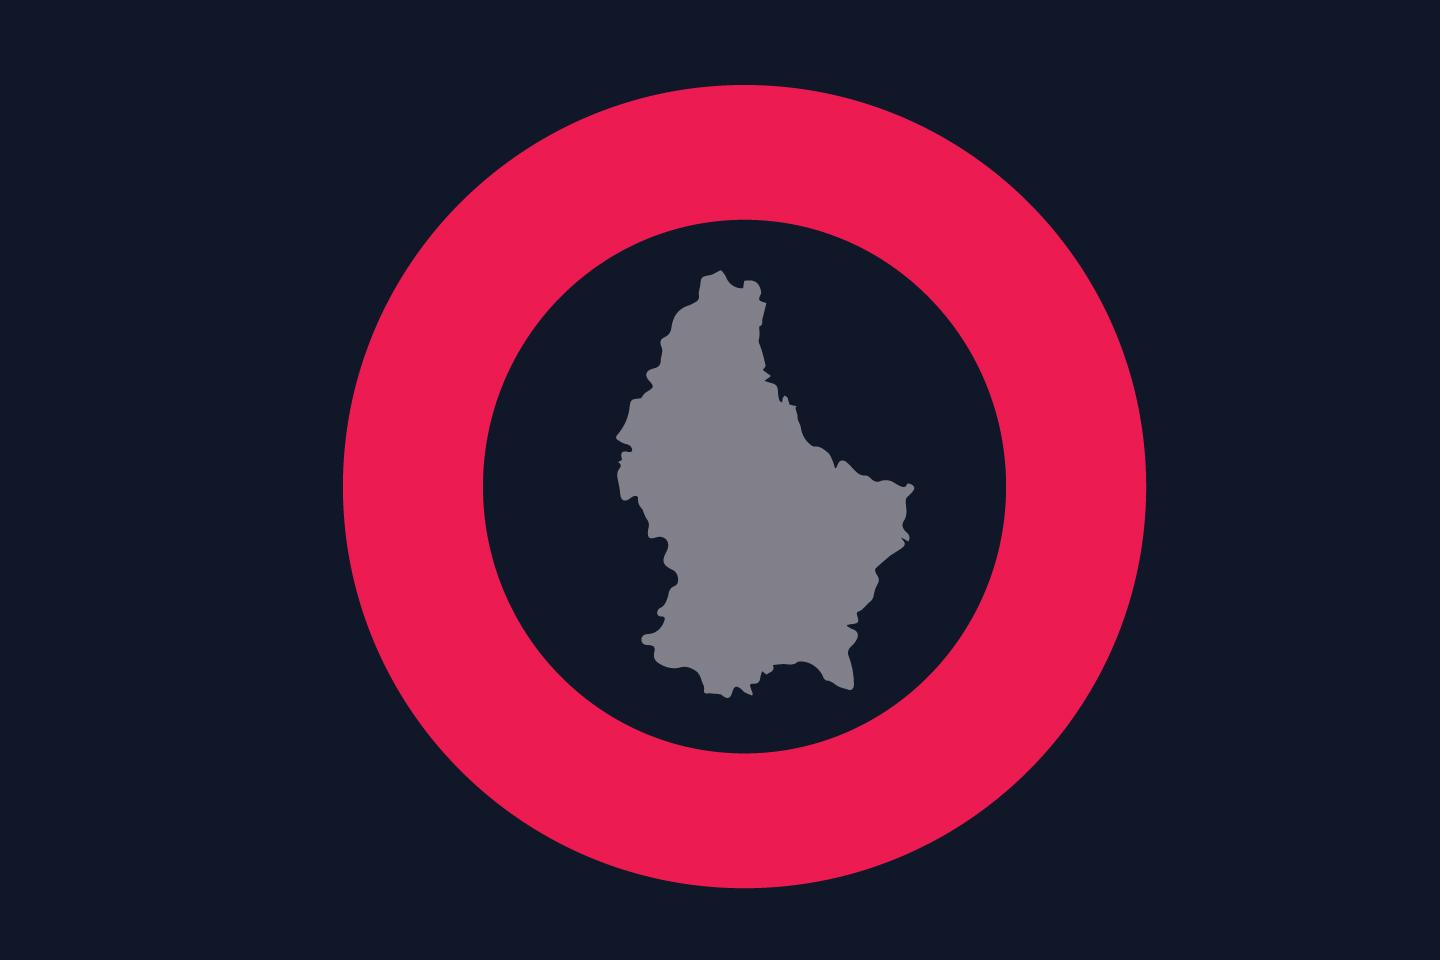 Luxembourg location icon